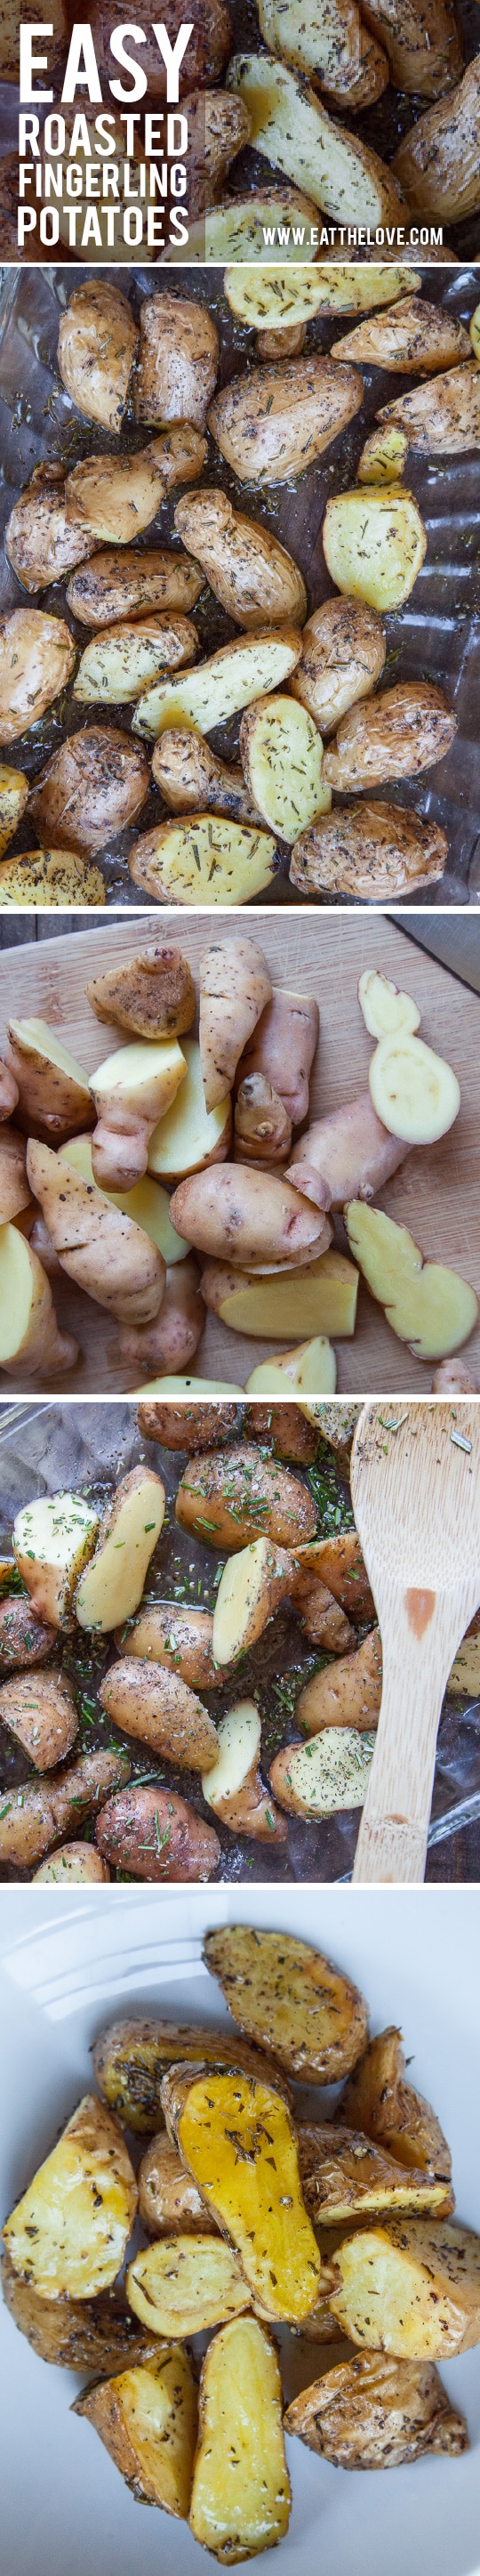 Easy Roasted Fingerling Potatoes. Recipe and photo by Irvin Lin of Eat the Love.